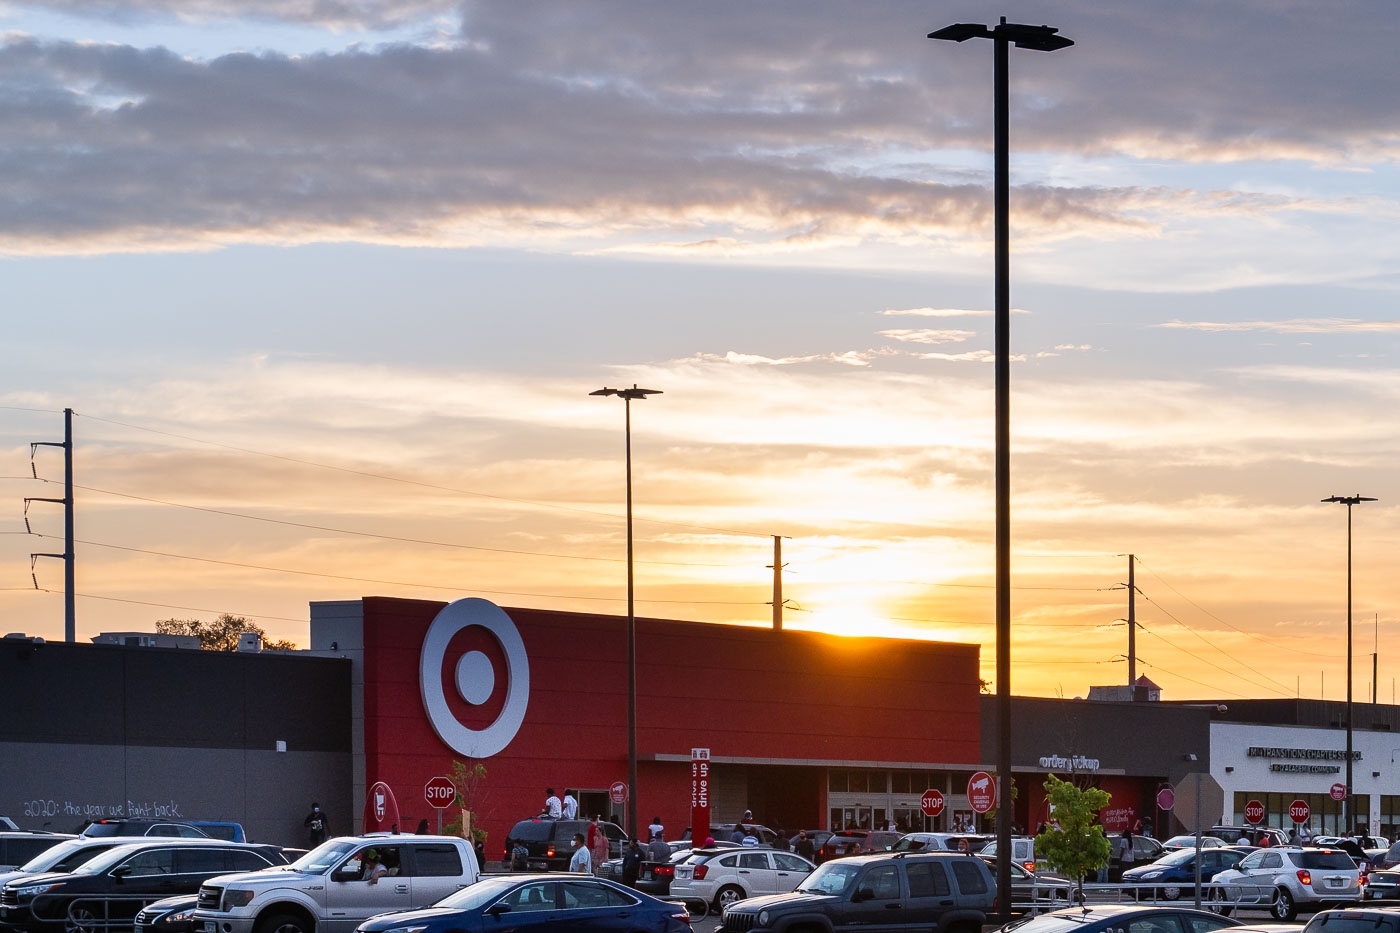 Sunset behind a looted target store